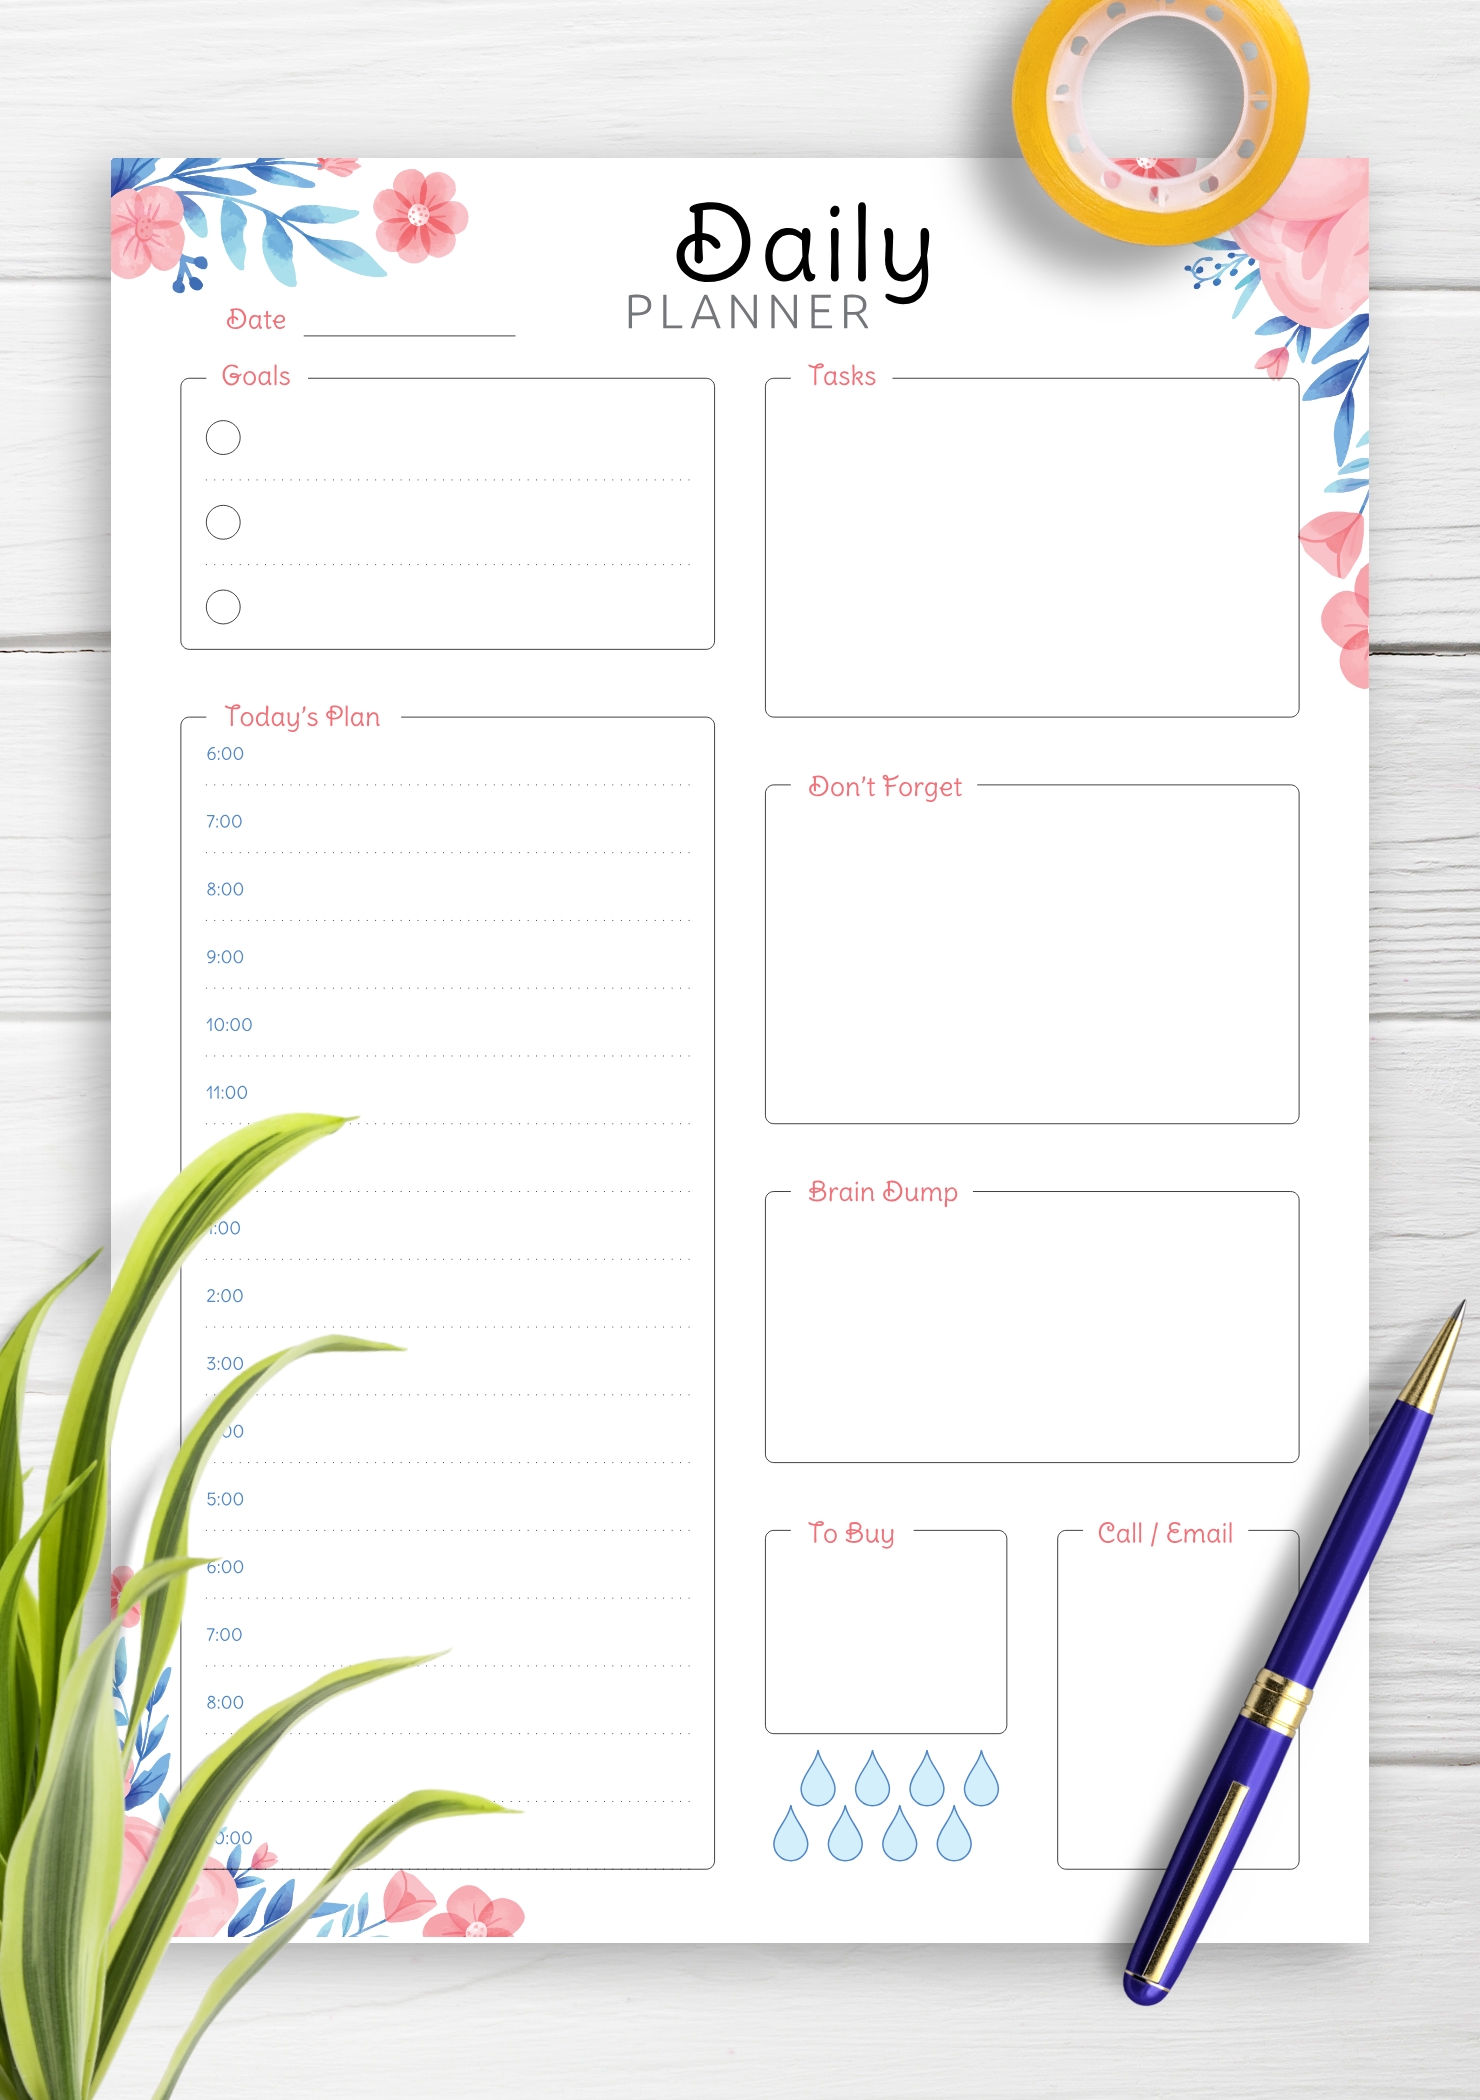 Download Printable Hourly Planner with Daily Tasks & Goals PDF